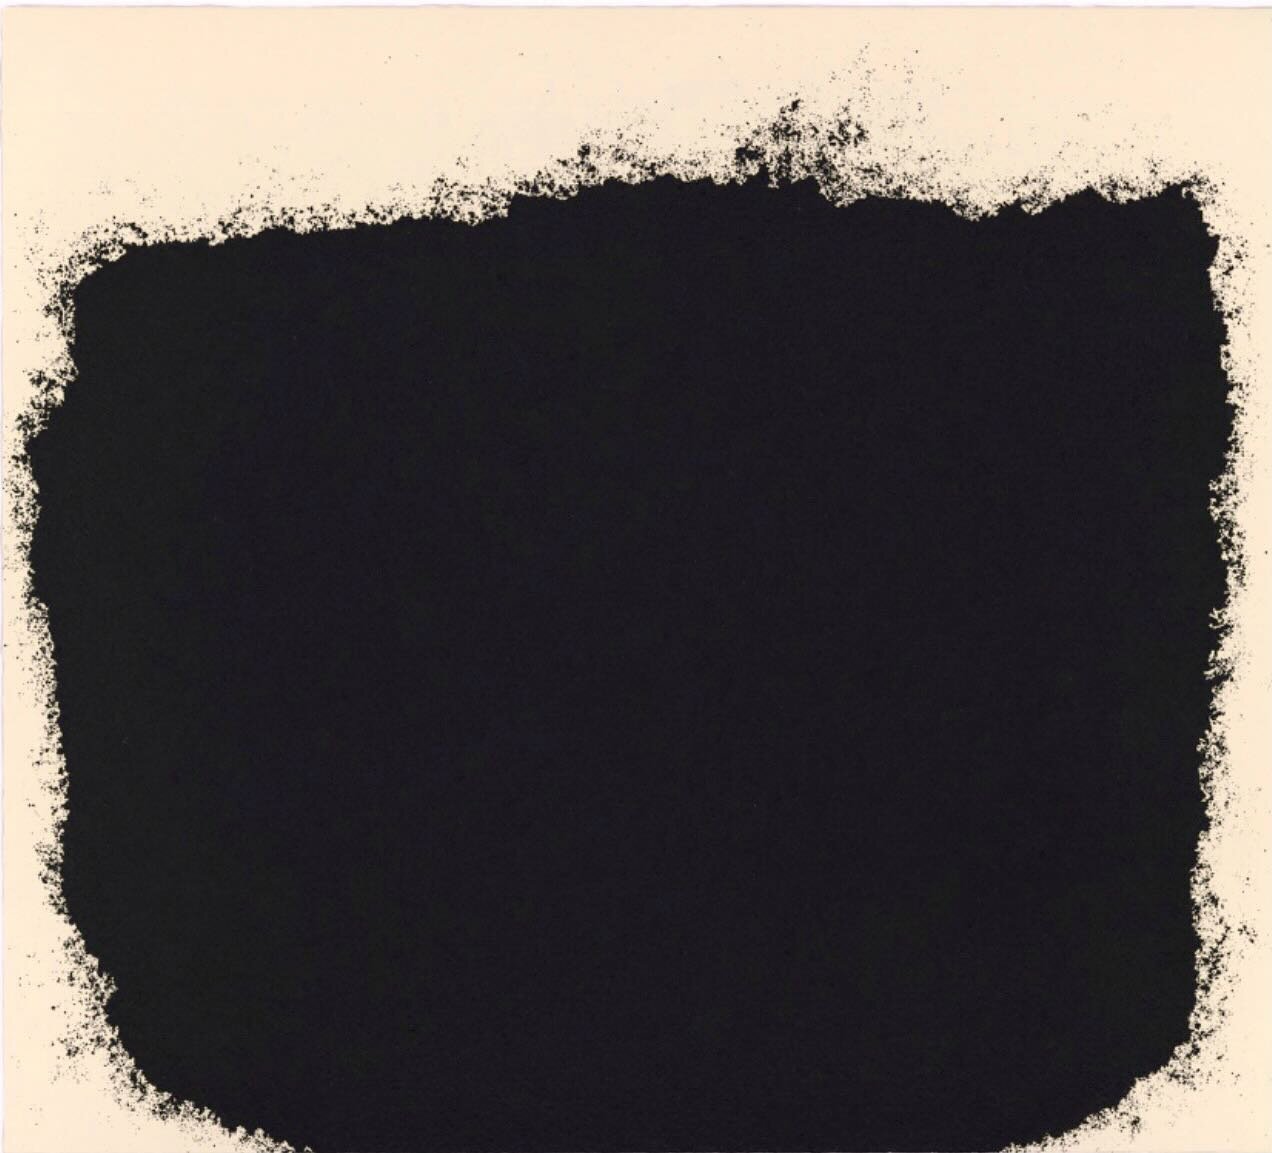 Saddened to hear of Richard Serra&rsquo;s passing yesterday. I had the great pleasure of seeing the colllaborative printers at @geminigel printing some of his works over the years on trips with my @otiscollege students. When I was in grad school @ris